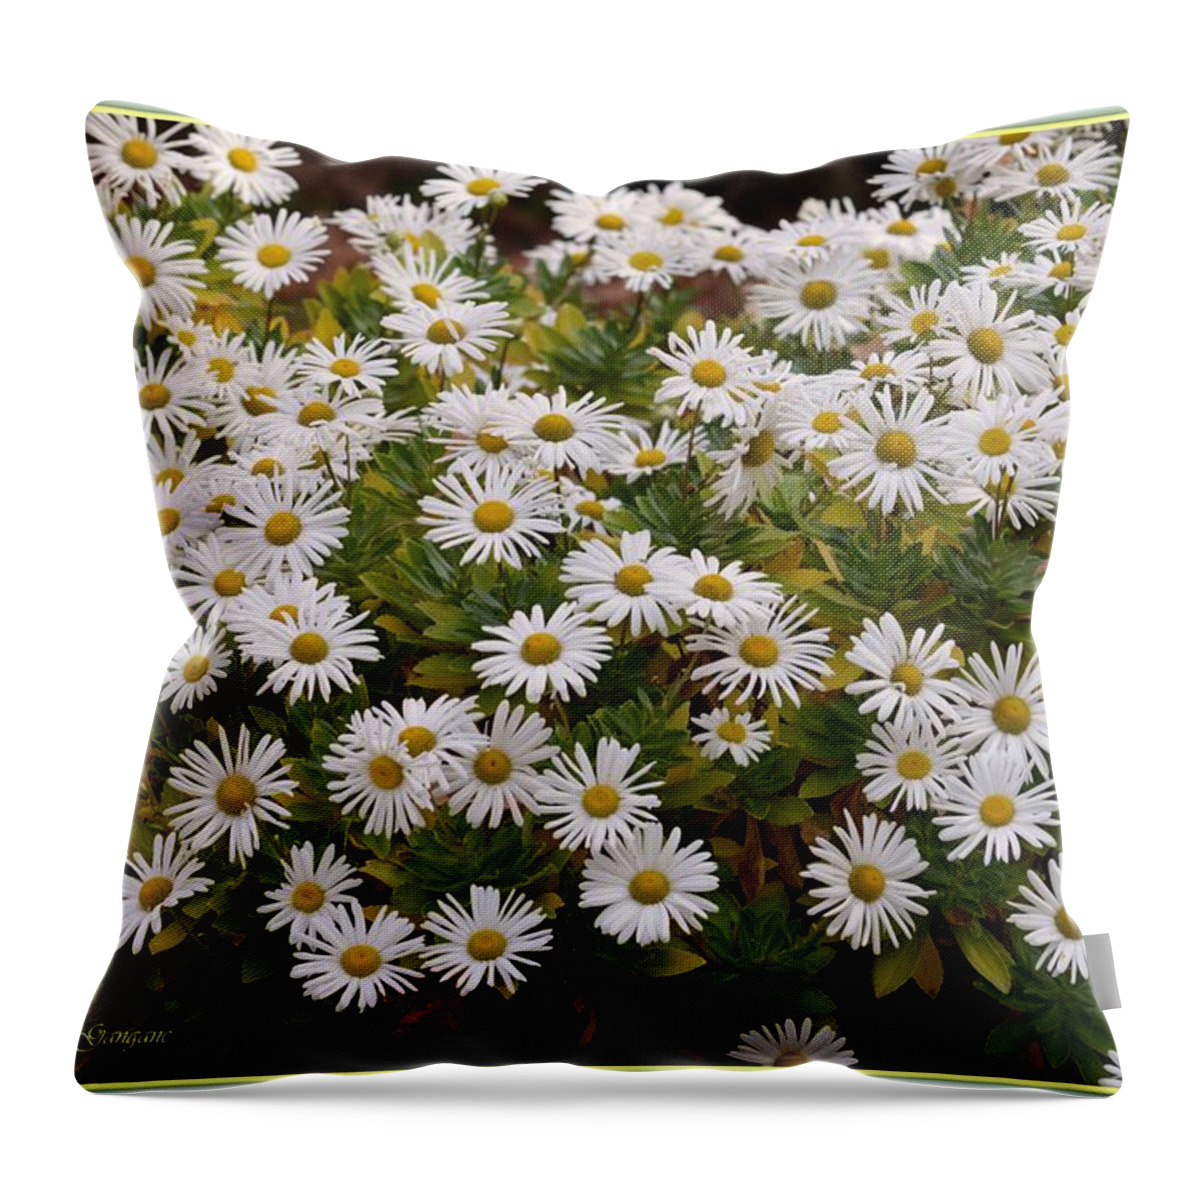 Daisy Wave Throw Pillow featuring the photograph Daisy Wave by Sonali Gangane